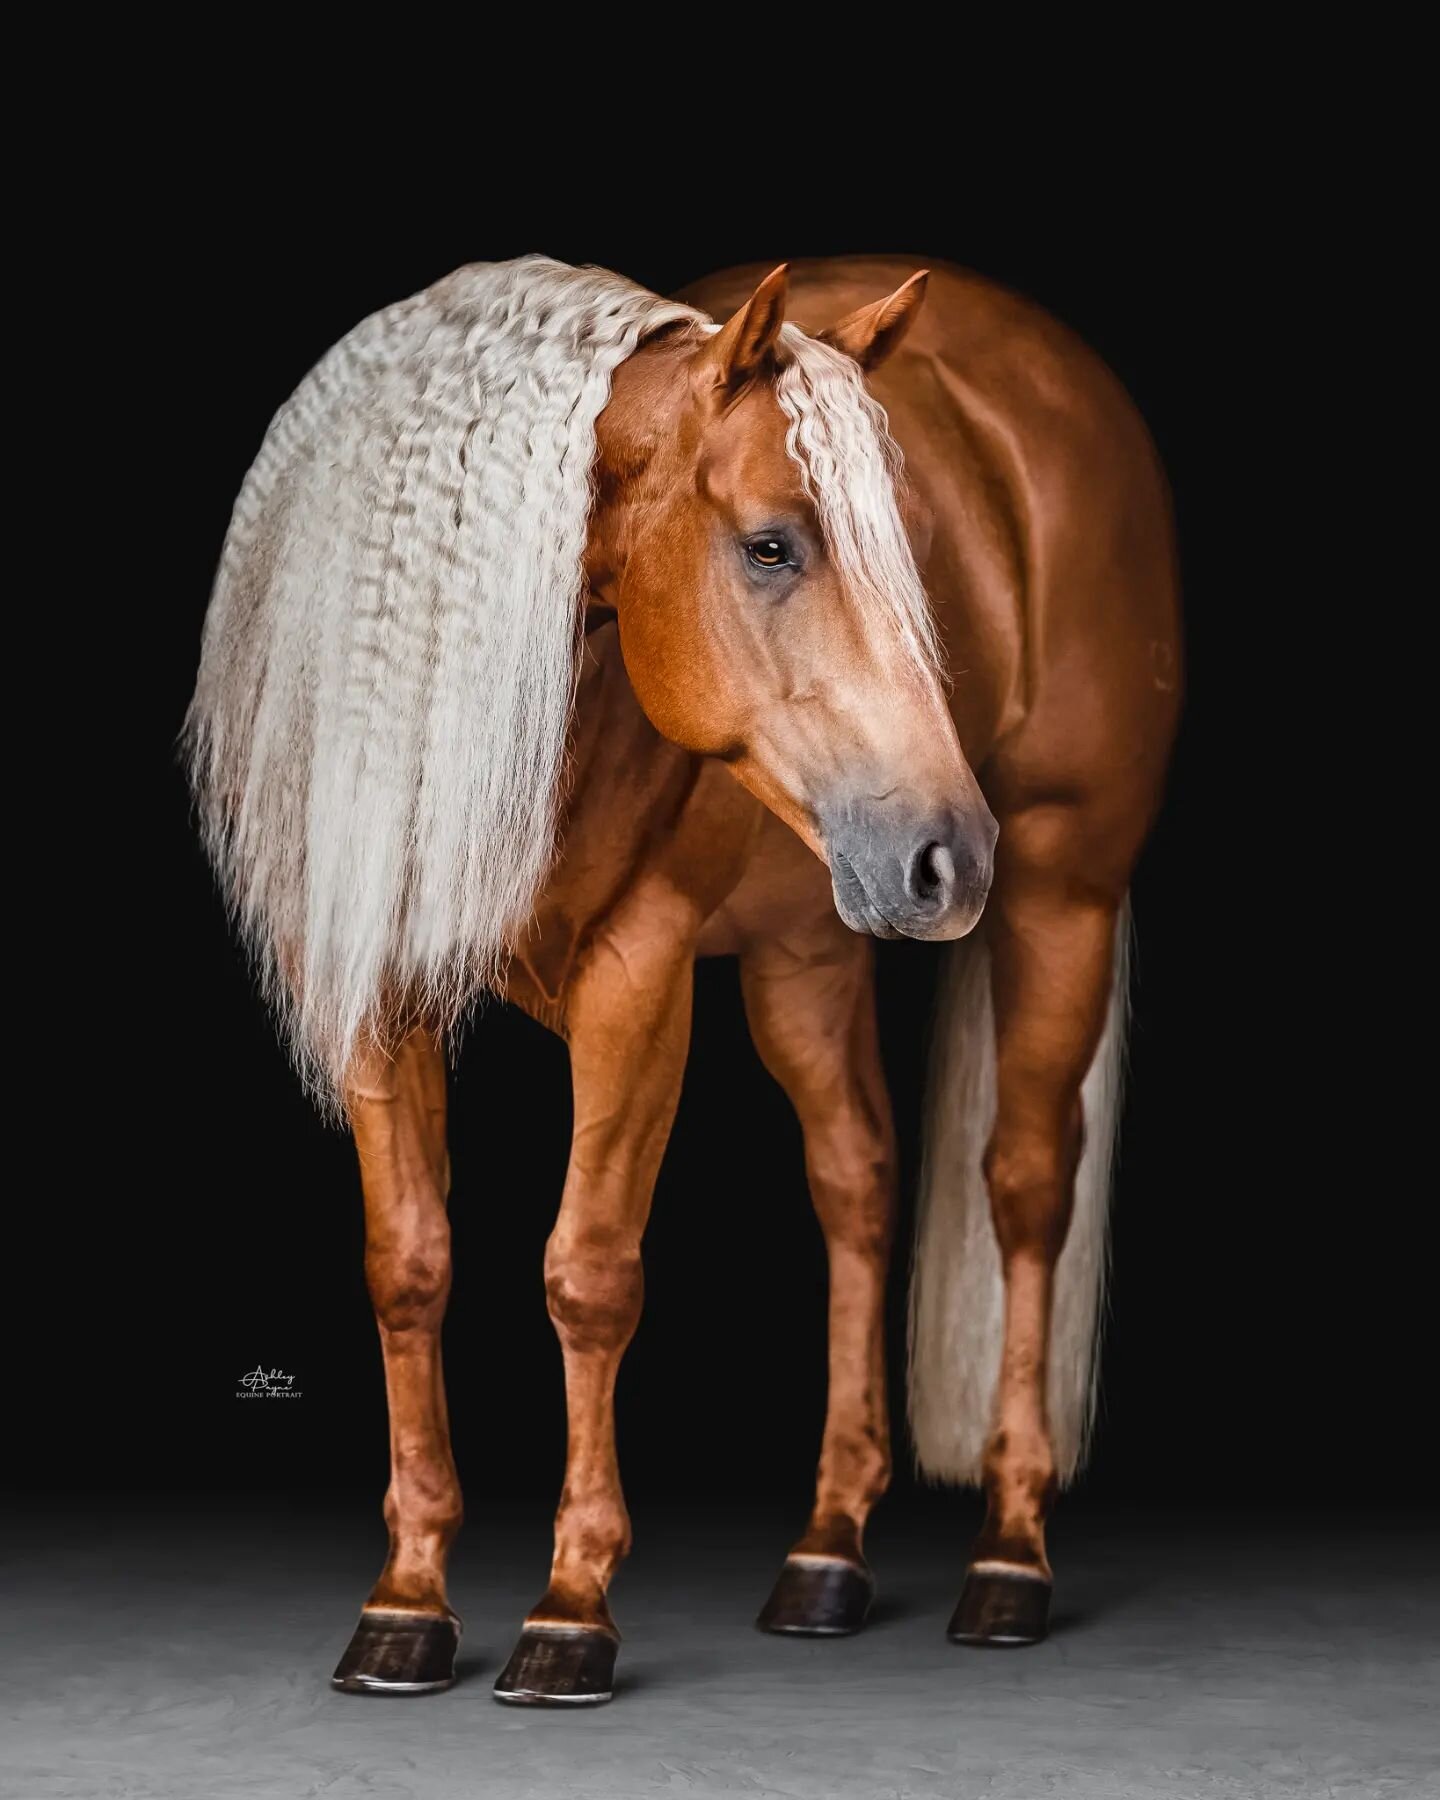 Exquisitly mannered with locks that will make you wish you knew his hair secrets 😍

Meet - Xtra JackOnTheRocks ⚜

And yes, I'll take 3 of him. 

www.ashleypaynephotography.com 

.
.
.
.
.
.
#aqha #ranchorse #western #palomino #palominoquarterhorse #